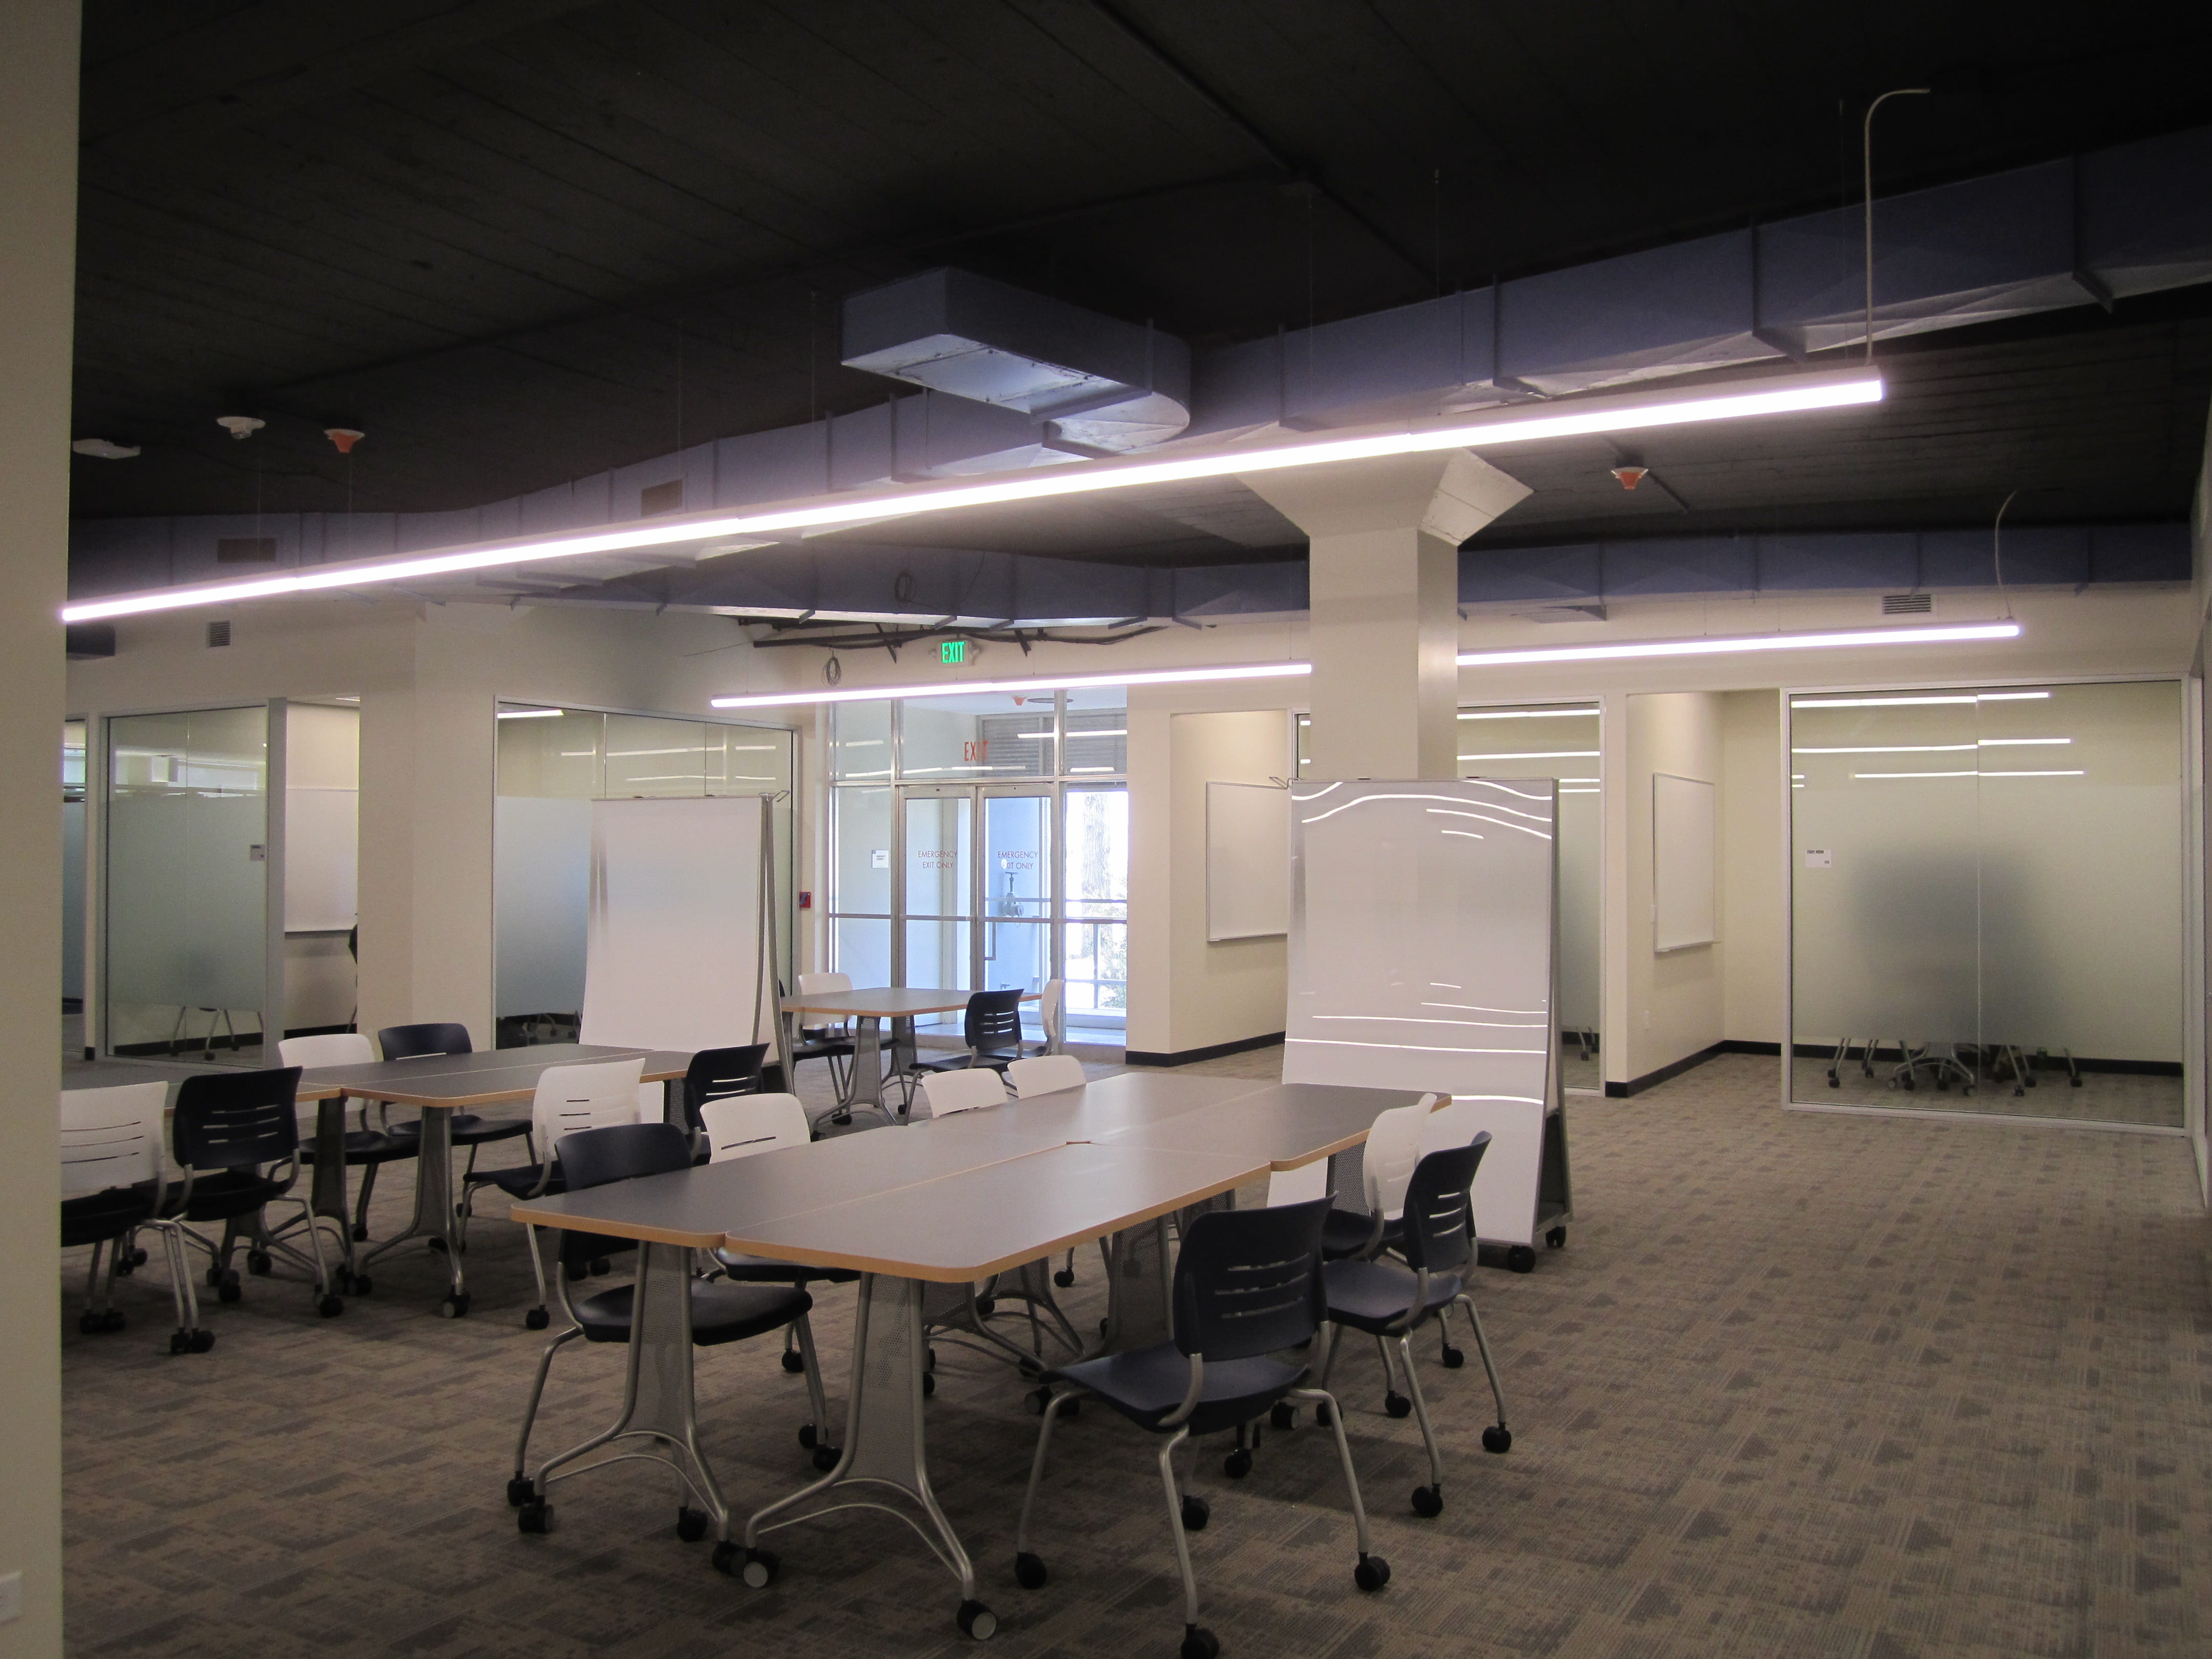 Gleeson 2nd Floor: a view of the new, flexible open study space